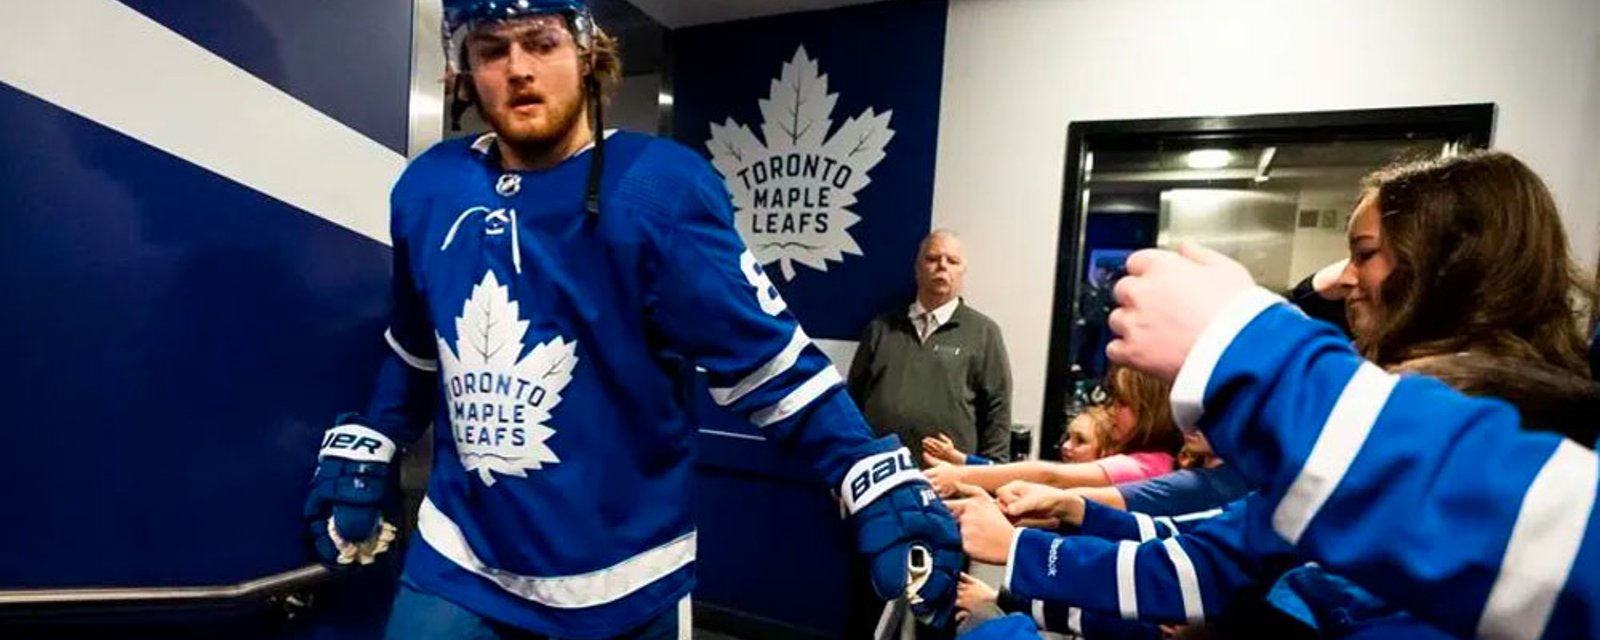 Nylander officially signed to $92 million contract and Leafs fans are not happy